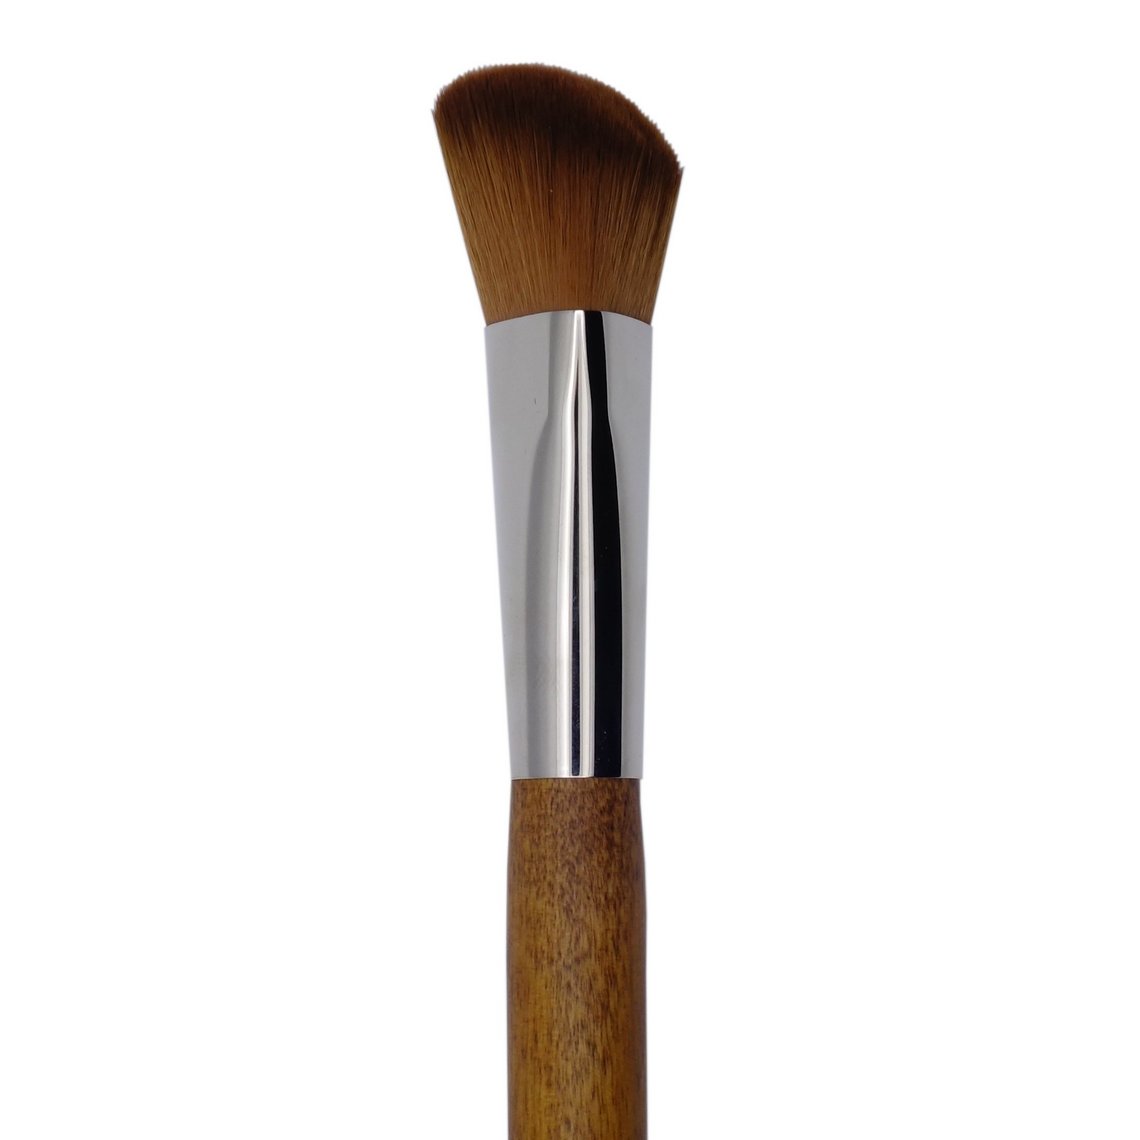 VERDOR Triangle makeup brush made in Germany